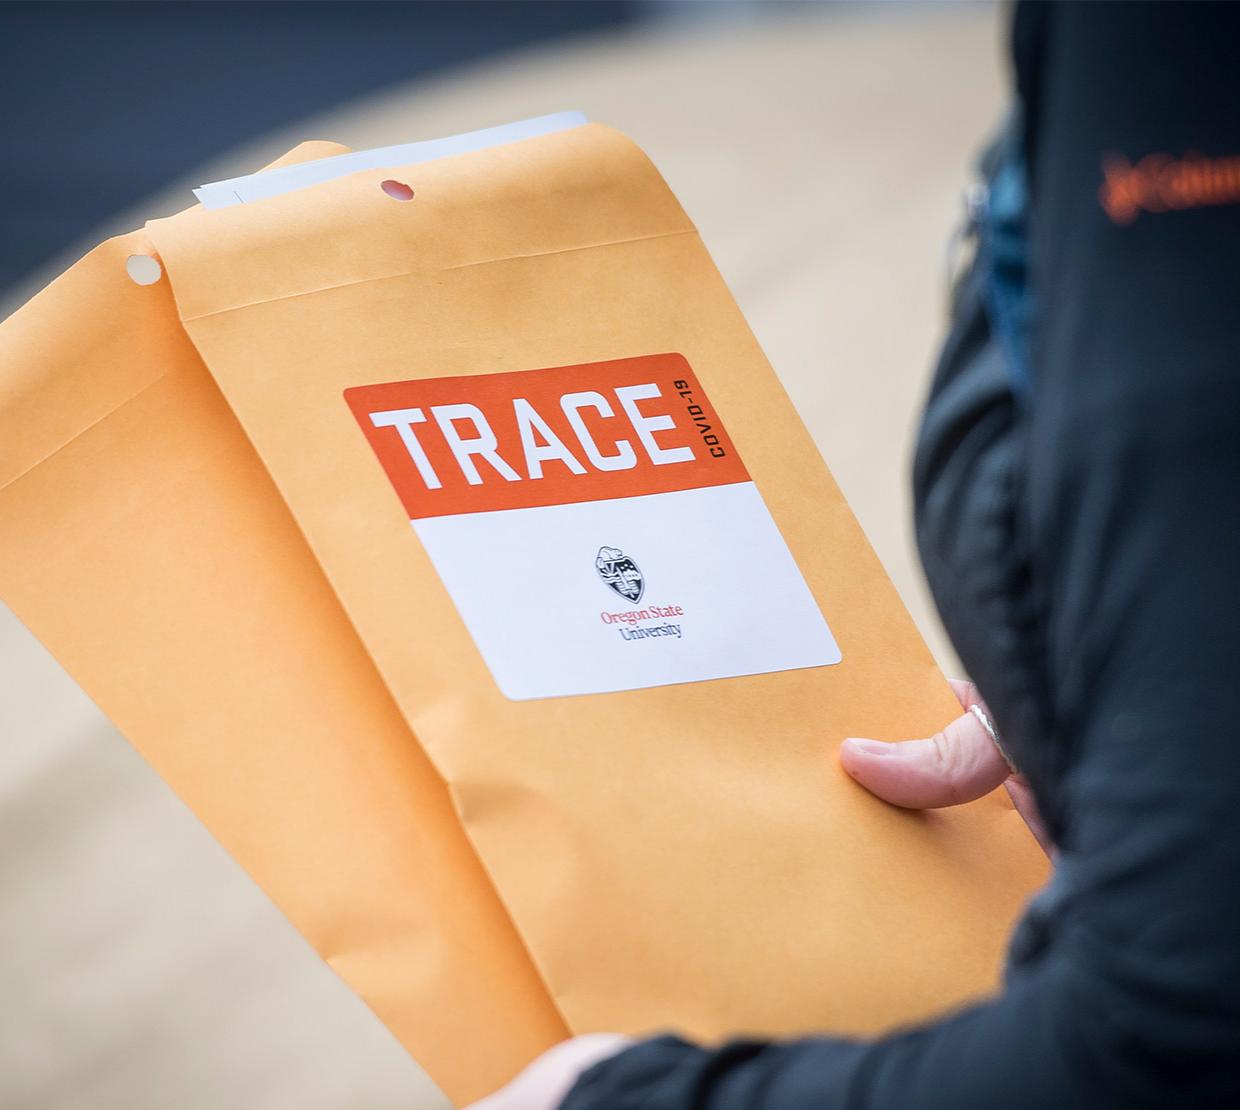 TRACE field staff member holding manilla envelopes with TRACE stickers on them.